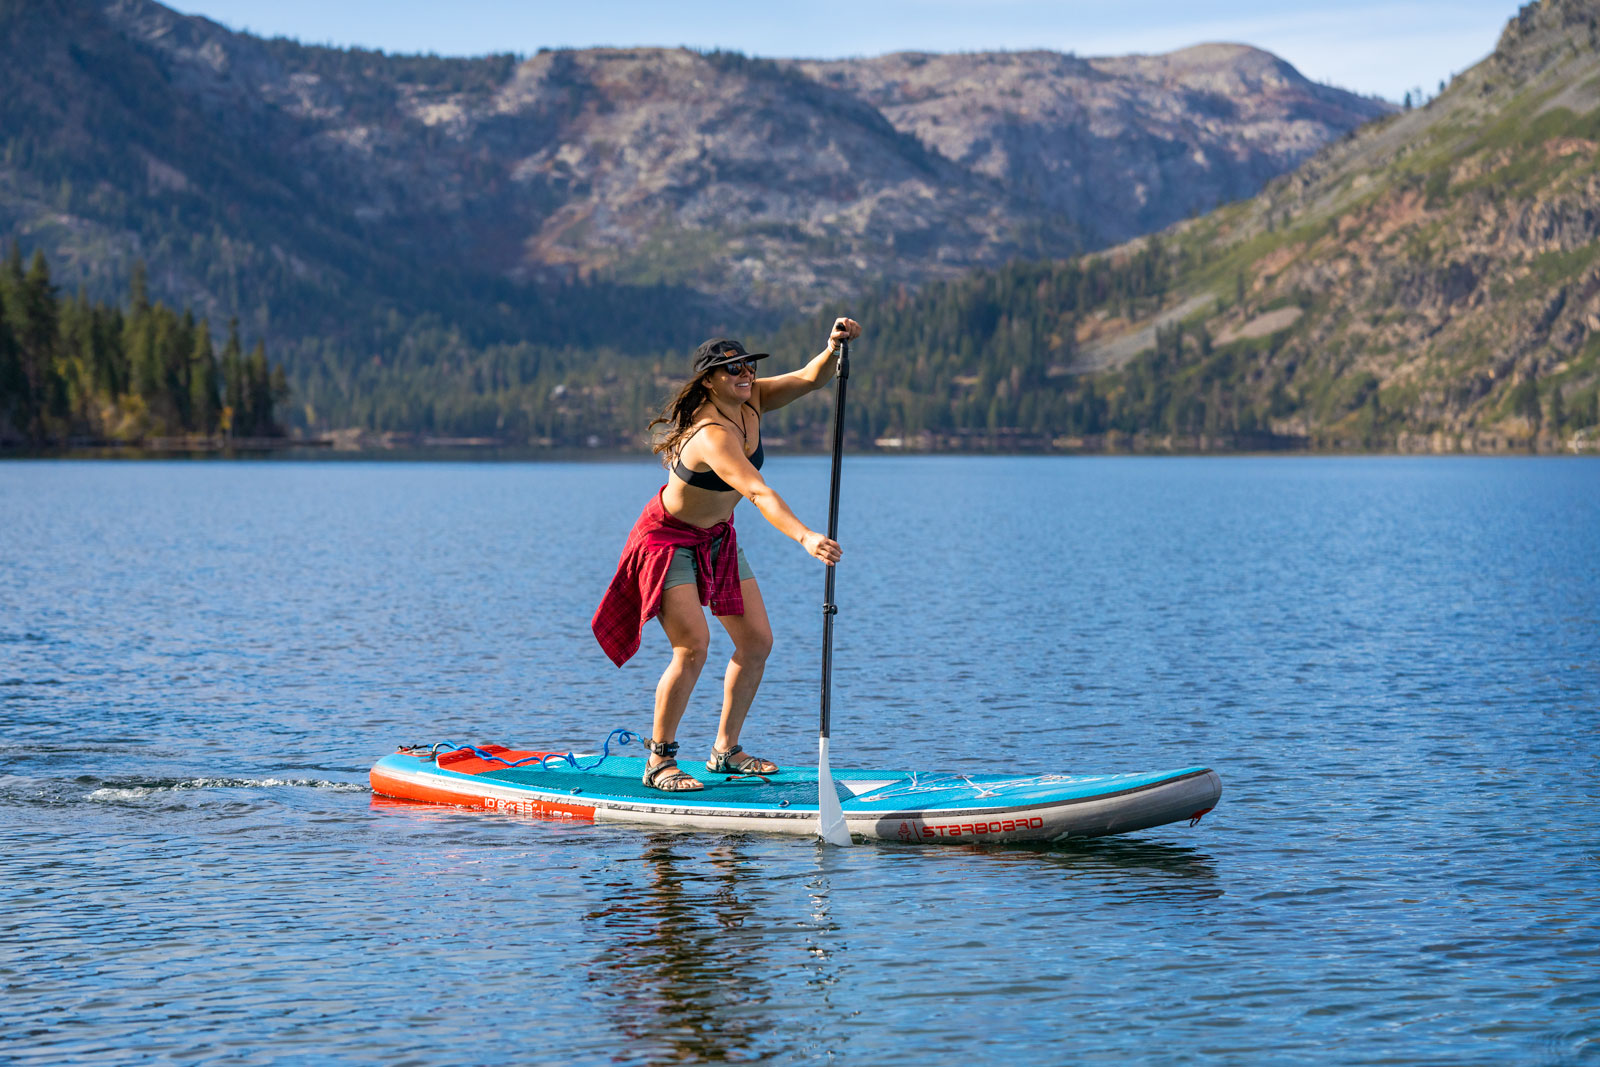 The definitive inflatable SUP stiffness guide